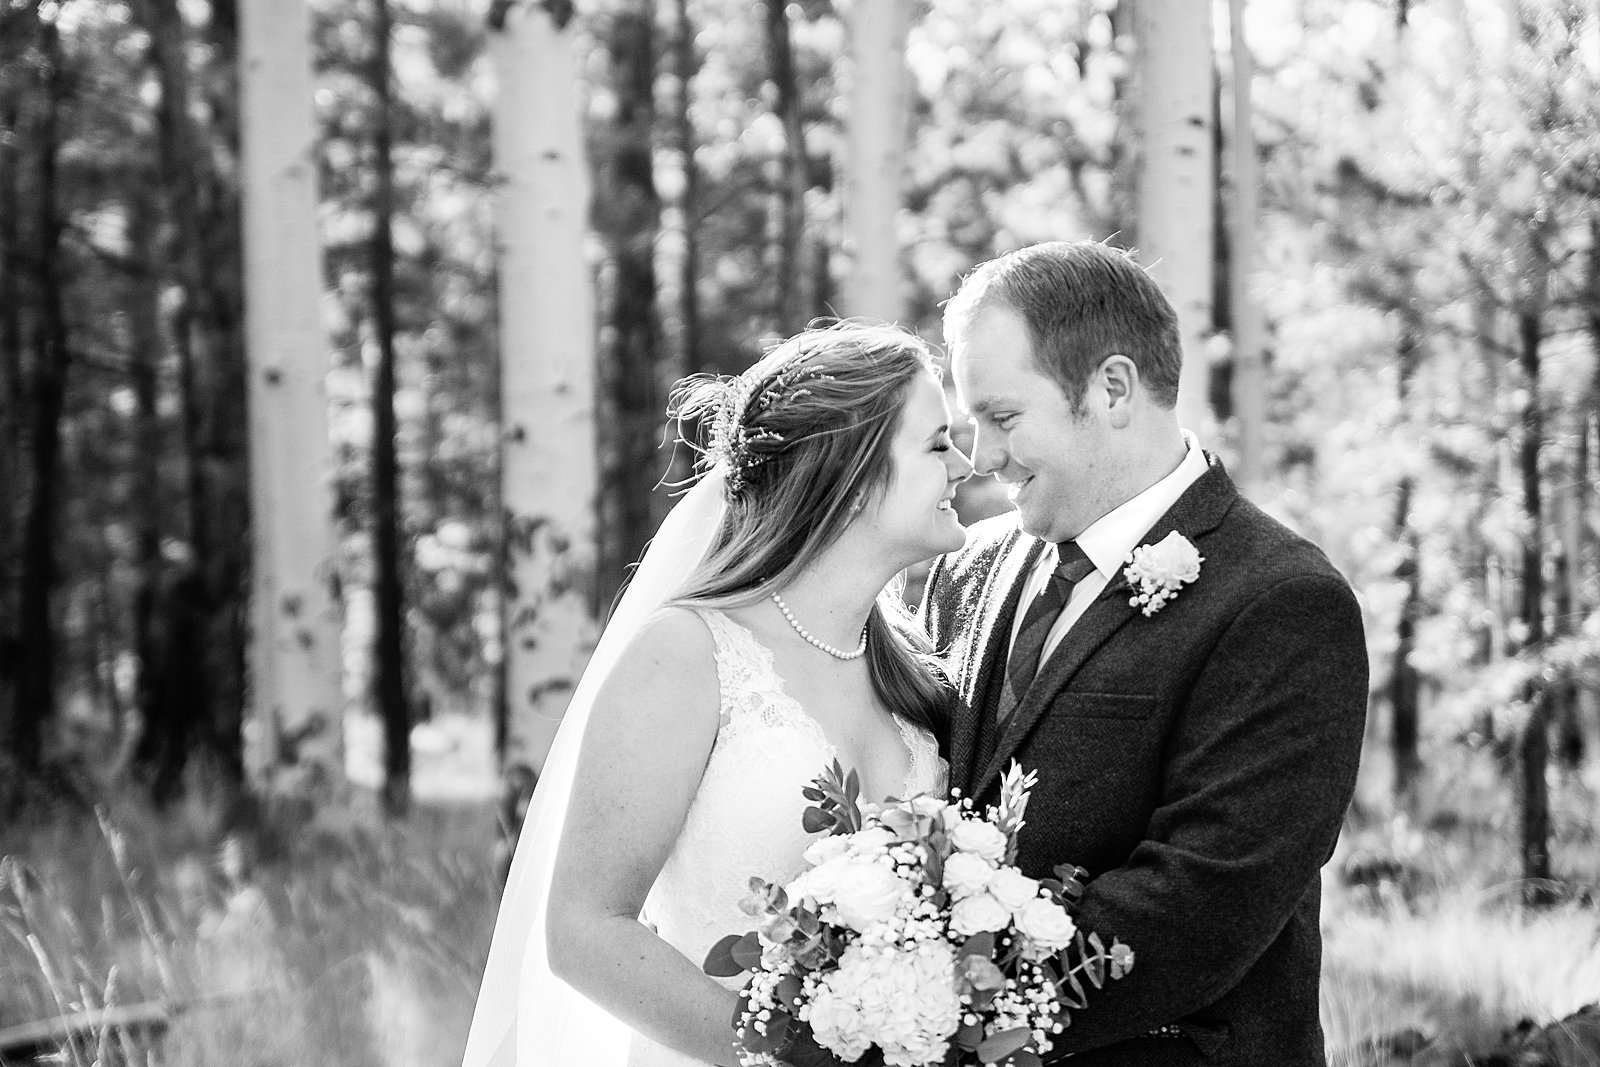 Bride and Groom share an intimate moment during their Chapel of the Holy Dove wedding by Flagstaff wedding photographer PMA Photography.